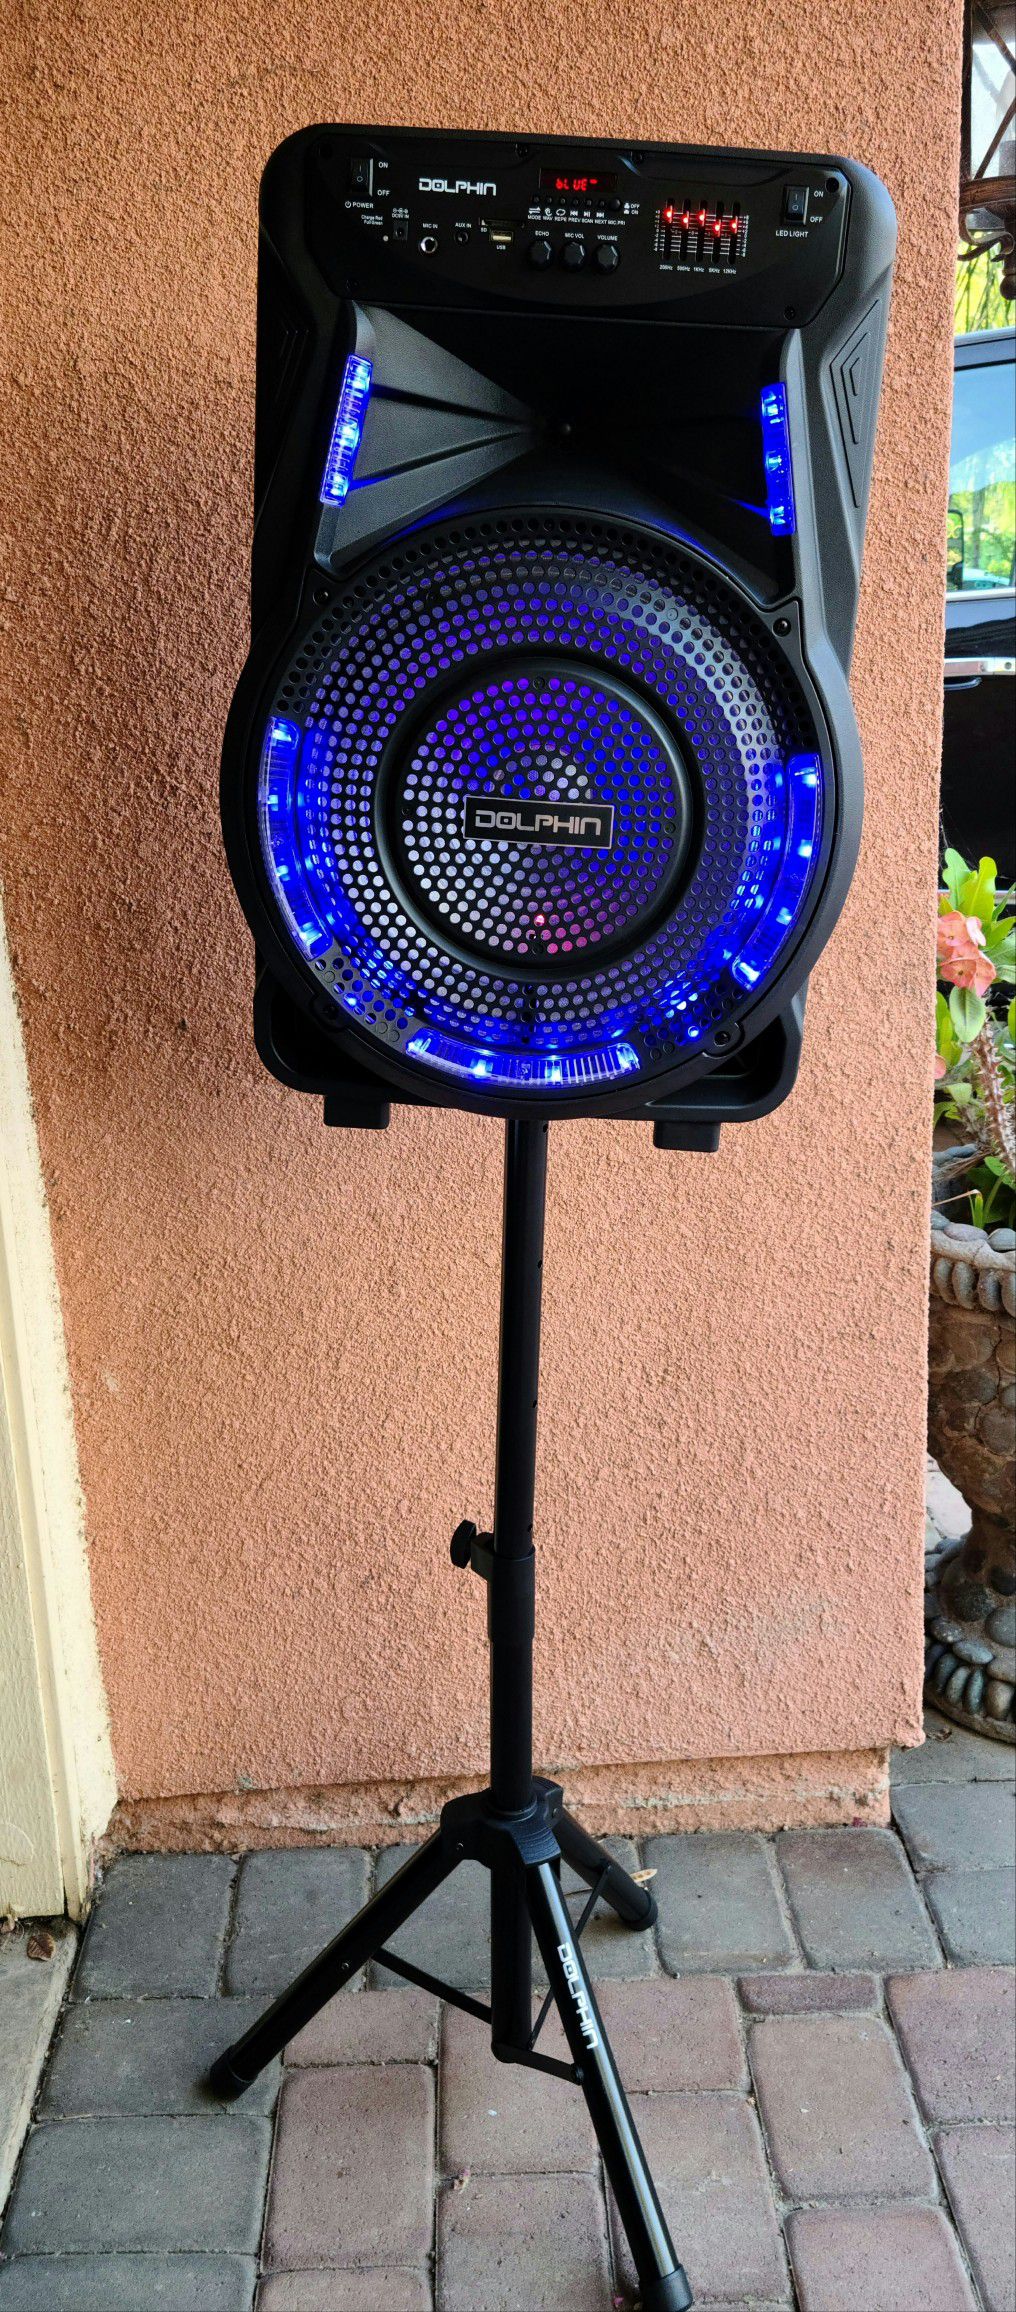 New Dolphin 15" subwoofer rechargeable Trolley speaker Bluetooth usb, sd card, fm radio, aux, microphone and stand